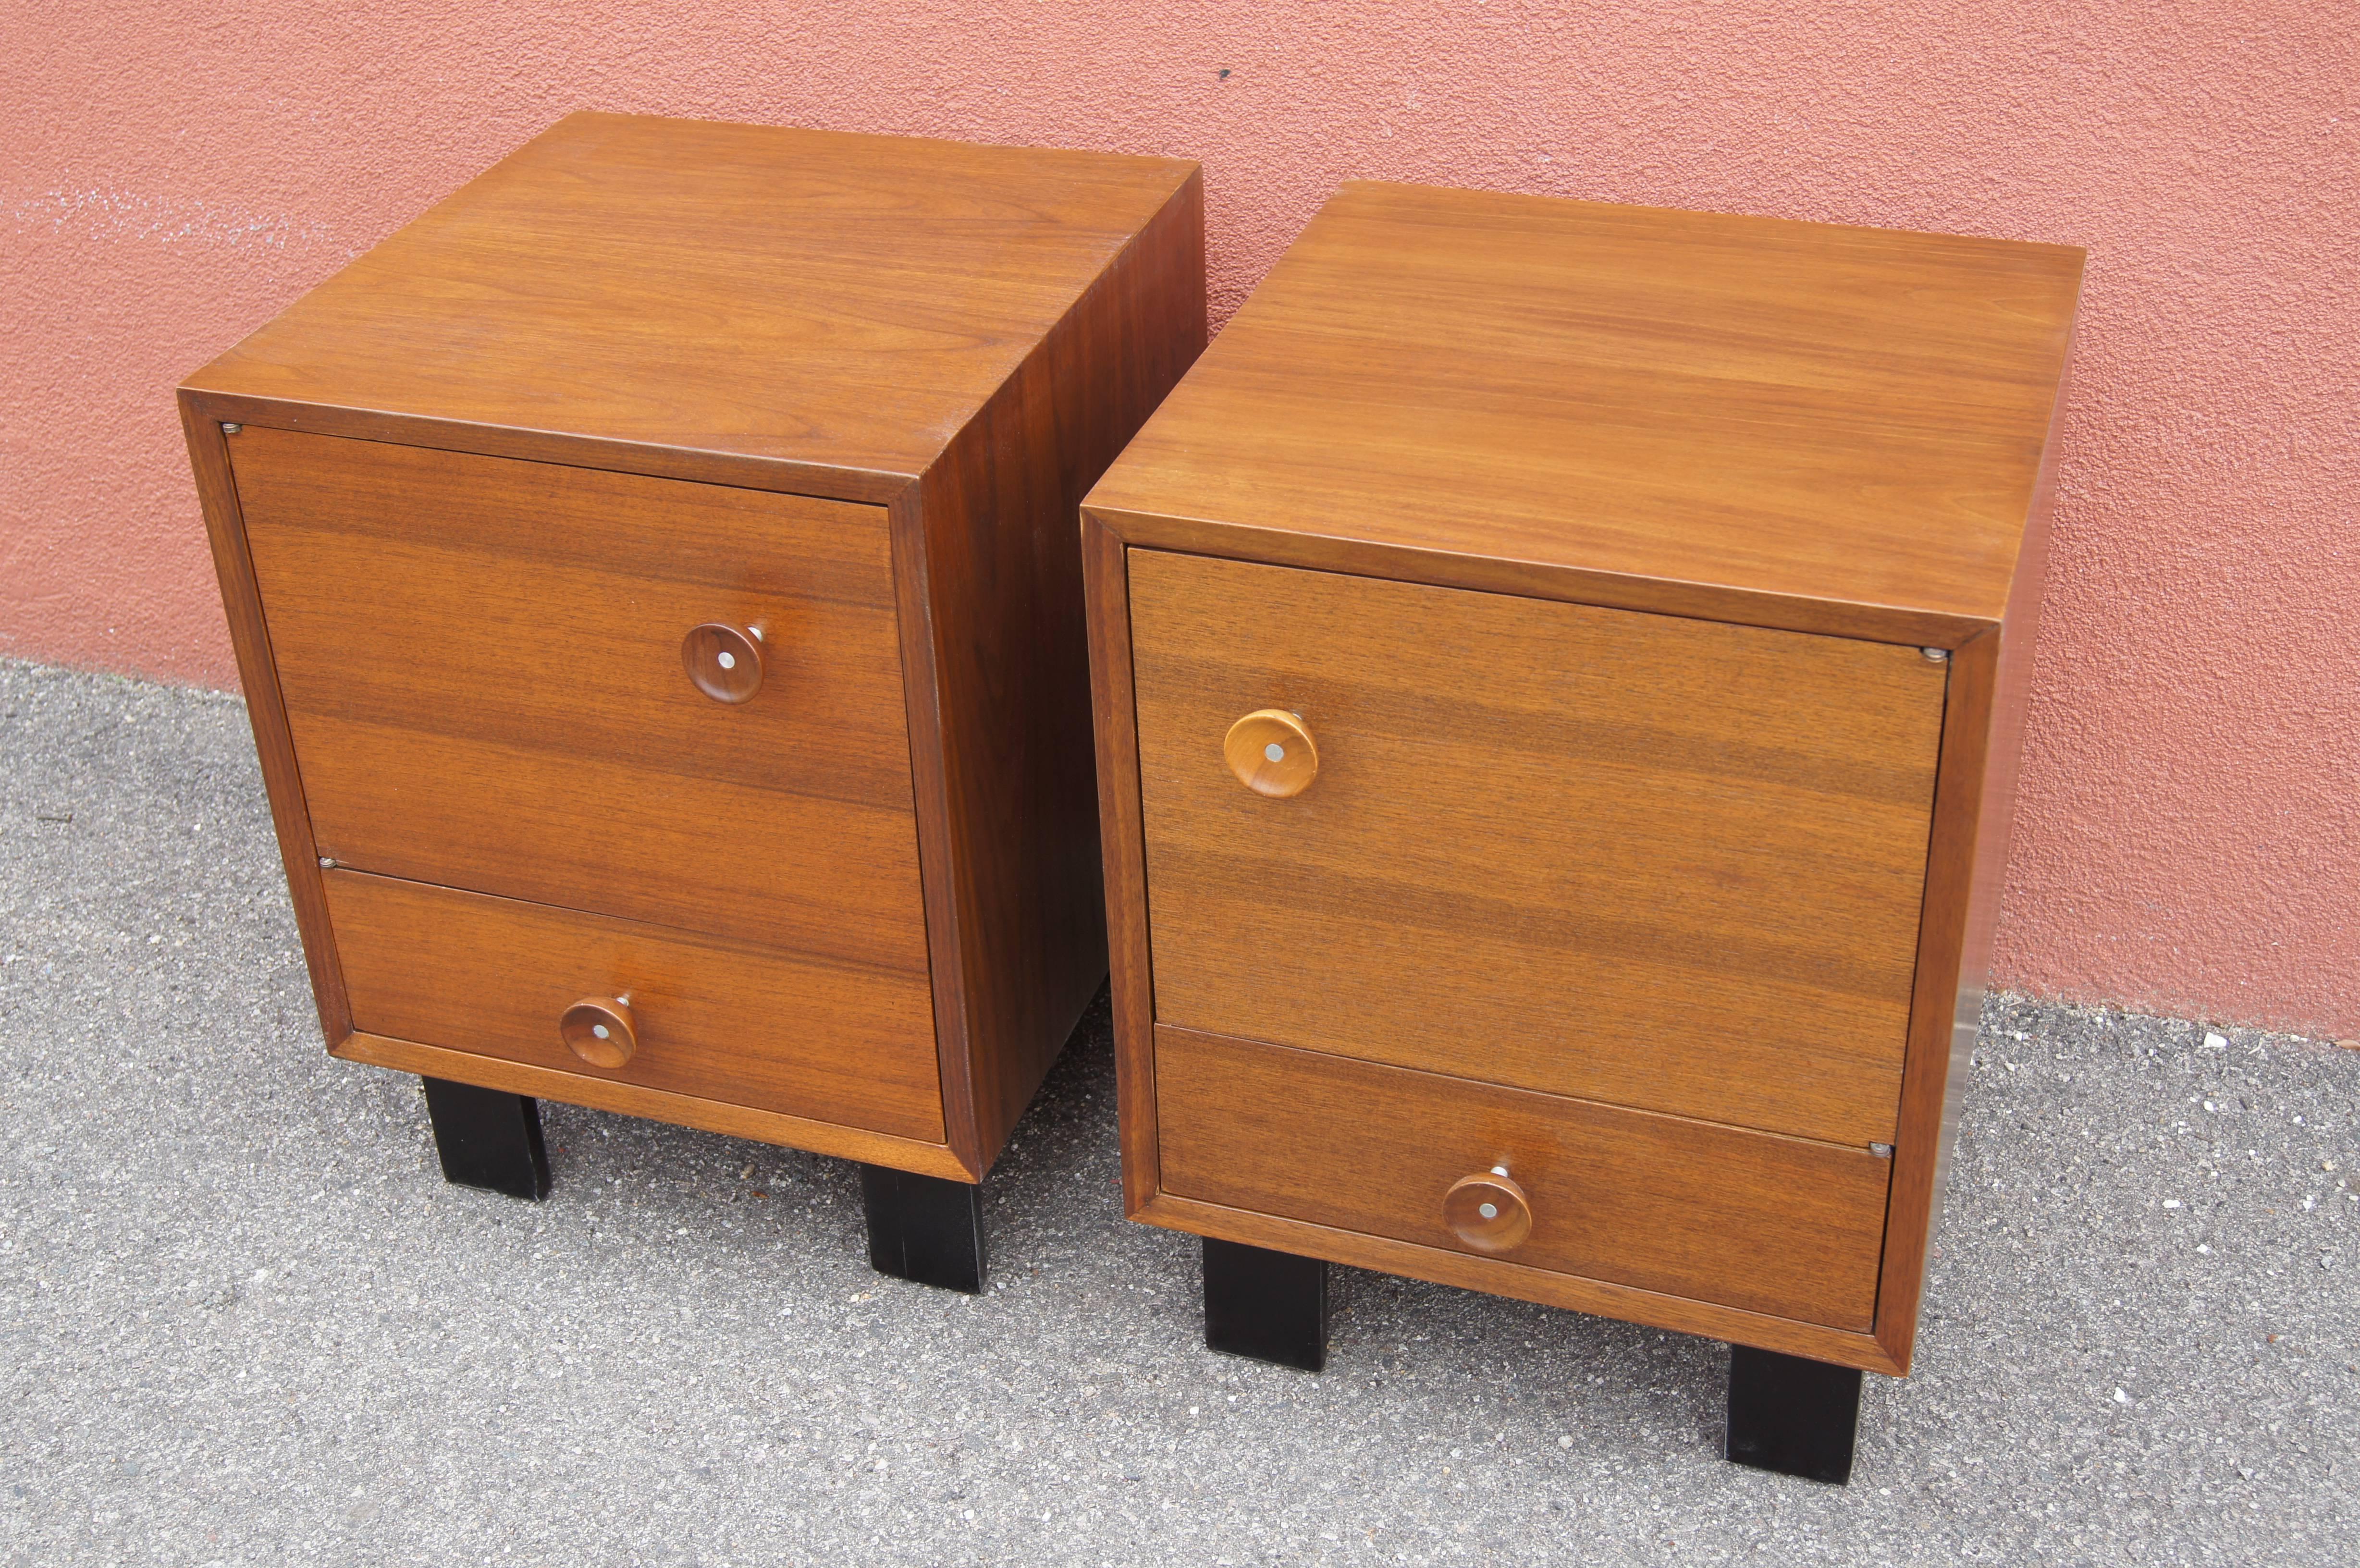 Mid-20th Century Pair of Walnut Nightstands, Model 4617 by George Nelson for Herman Miller